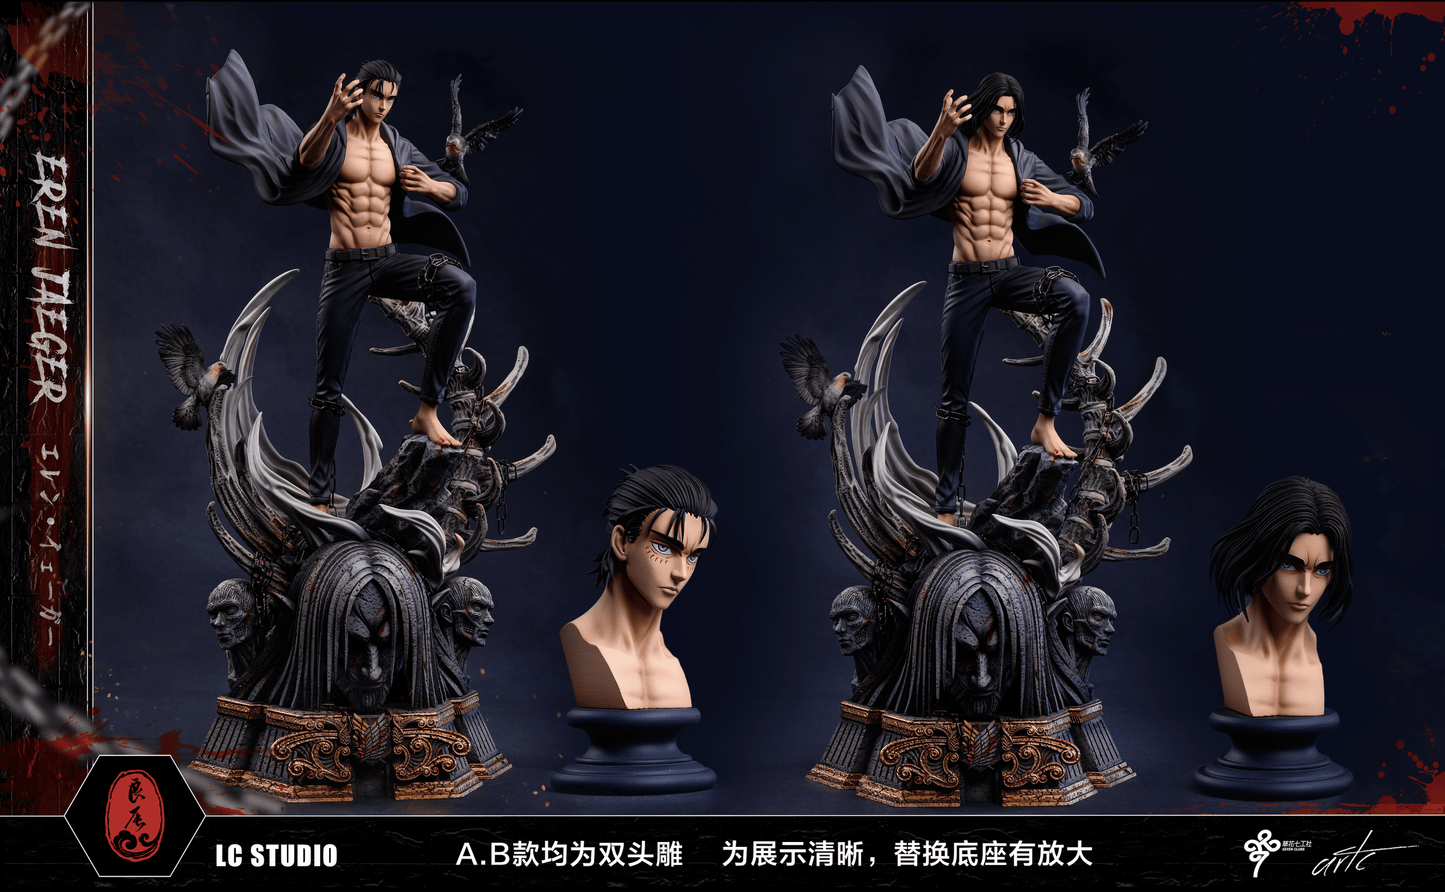 LC STUDIO – ATTACK ON TITAN: 6. 19-YEAR-OLD EREN YEAGER [PRE-ORDER]